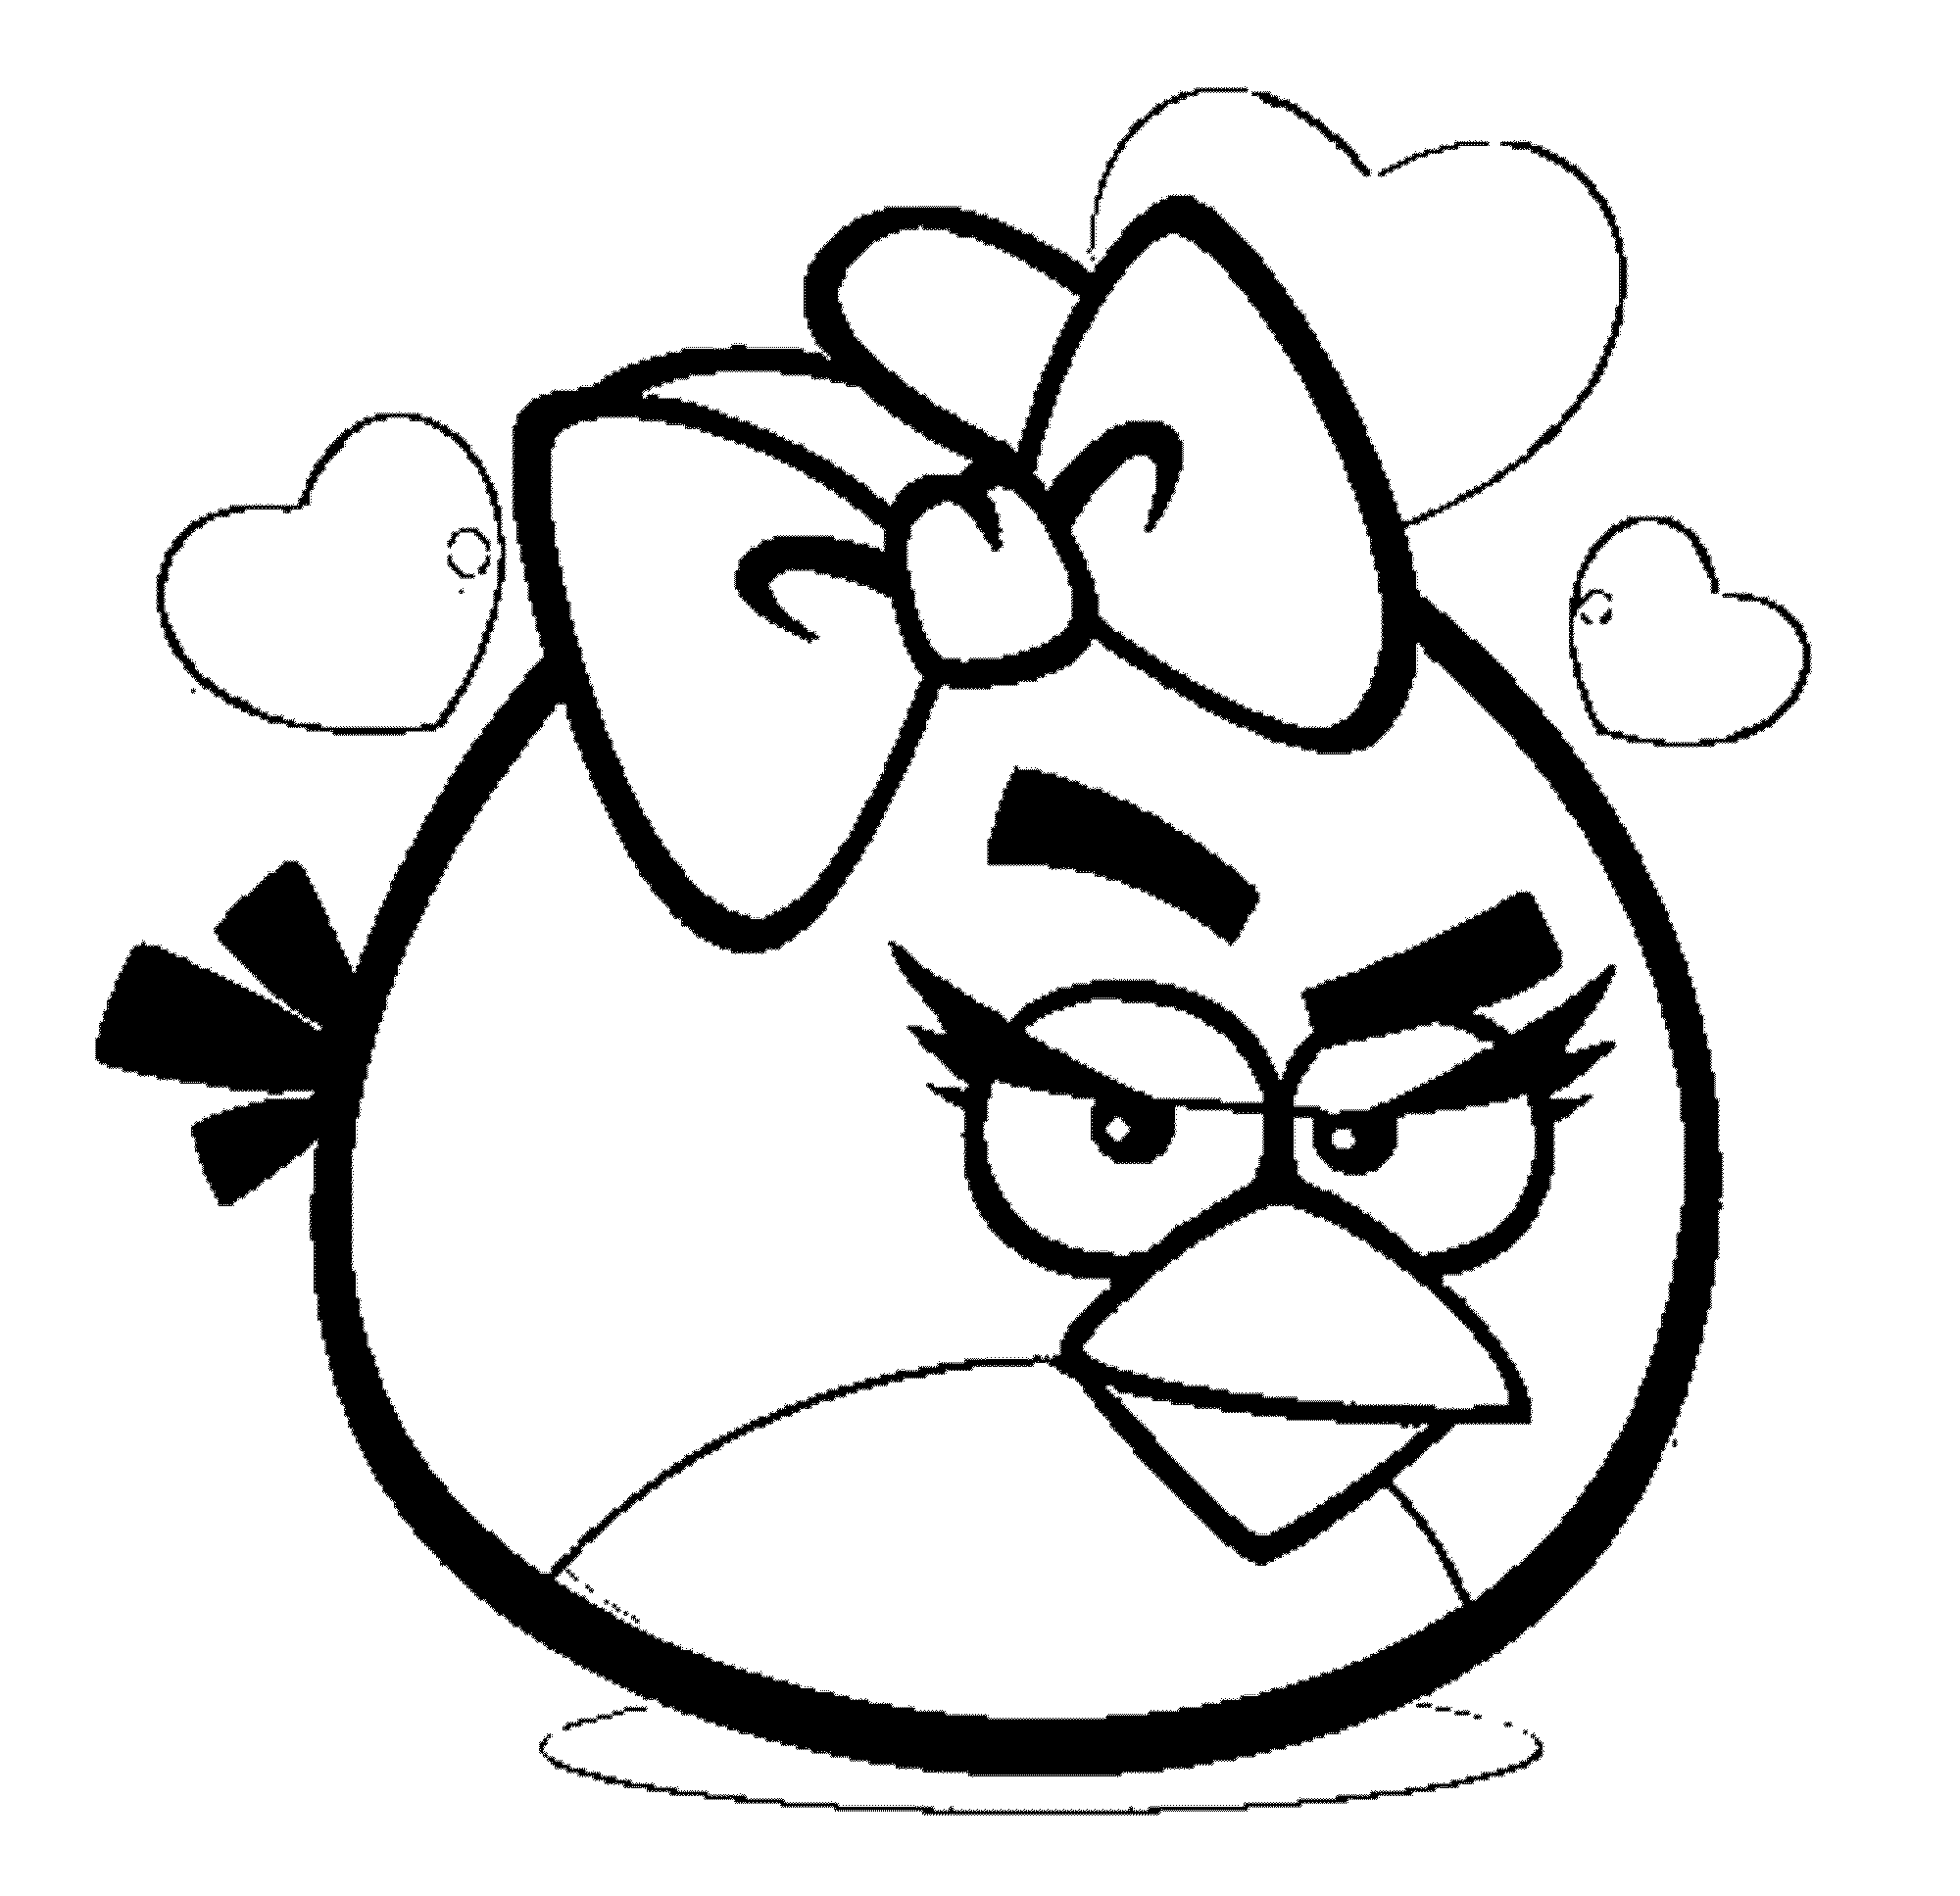 Download Angry Birds Coloring Pages for Your Small Kids